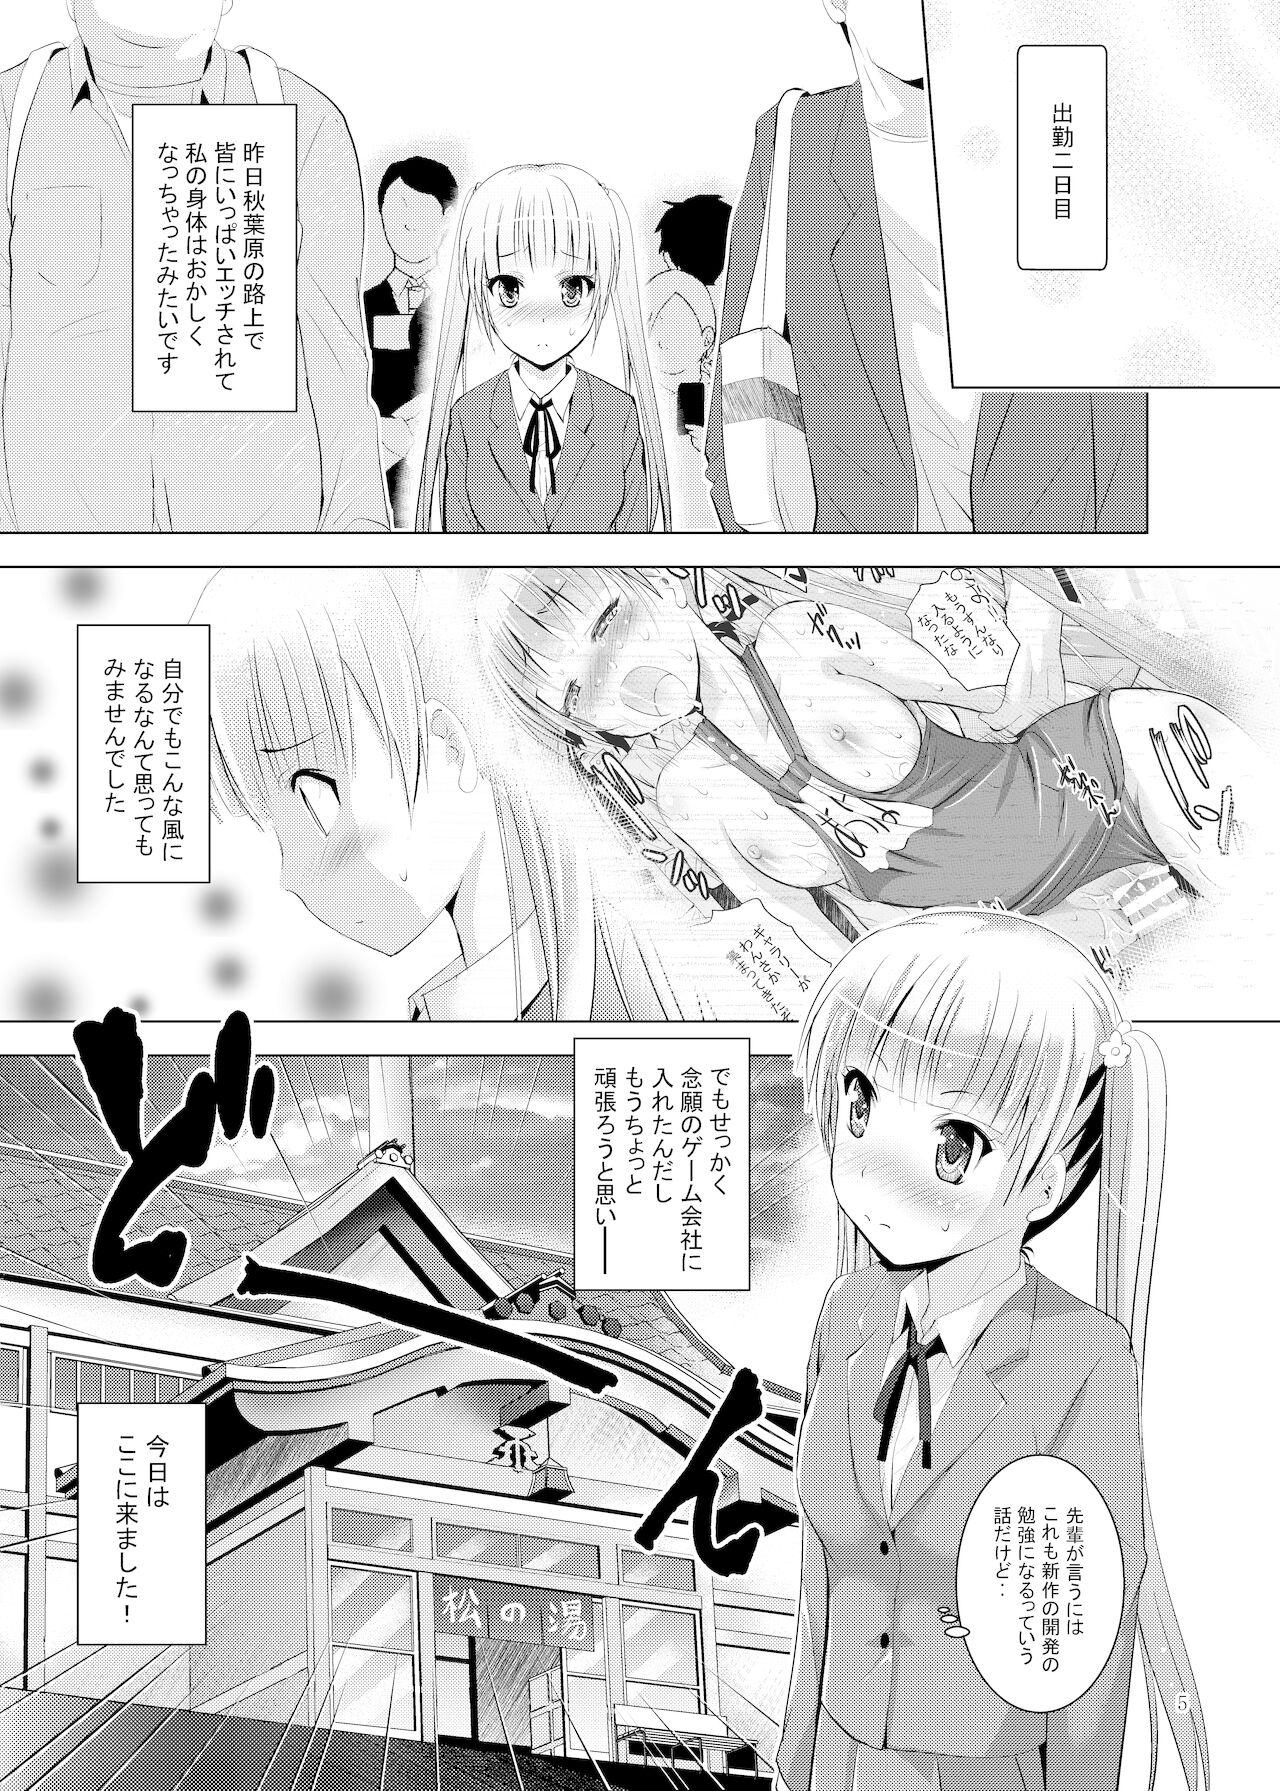 Cut Mousou Mini Theater 39 - New game Indonesia - Page 5